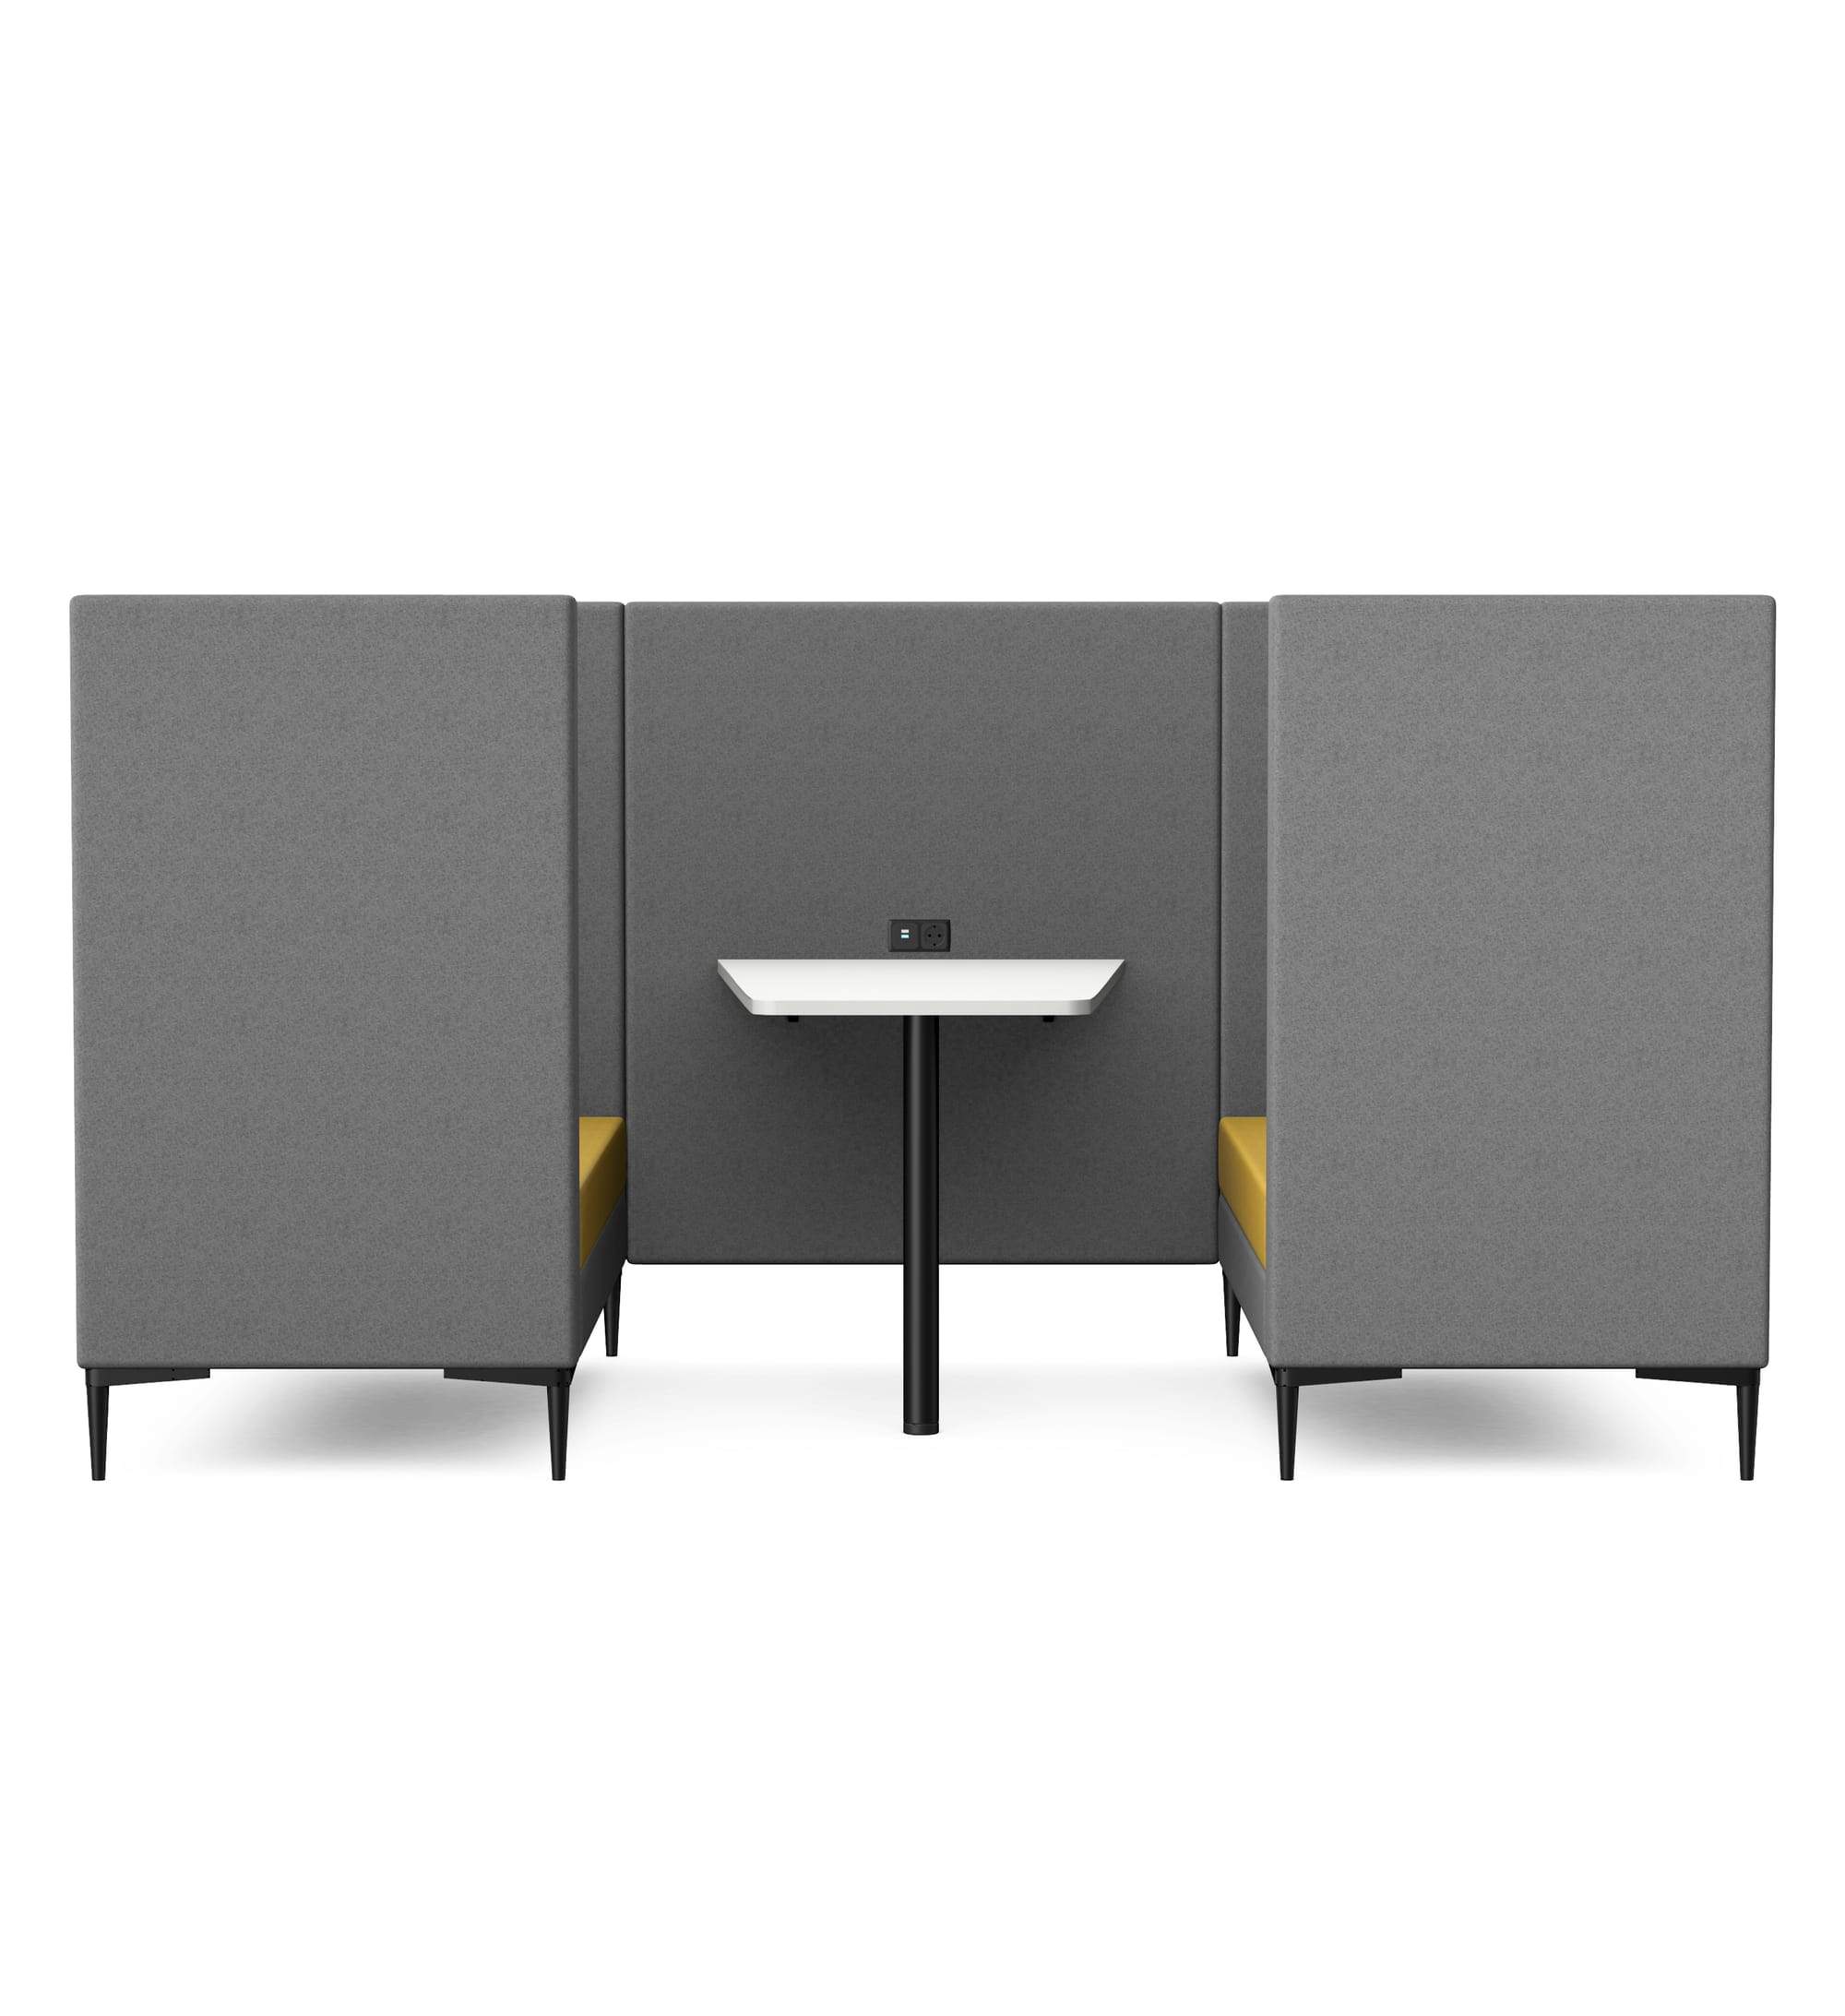 ELEMENT - Four Seat Highback Booth with Table